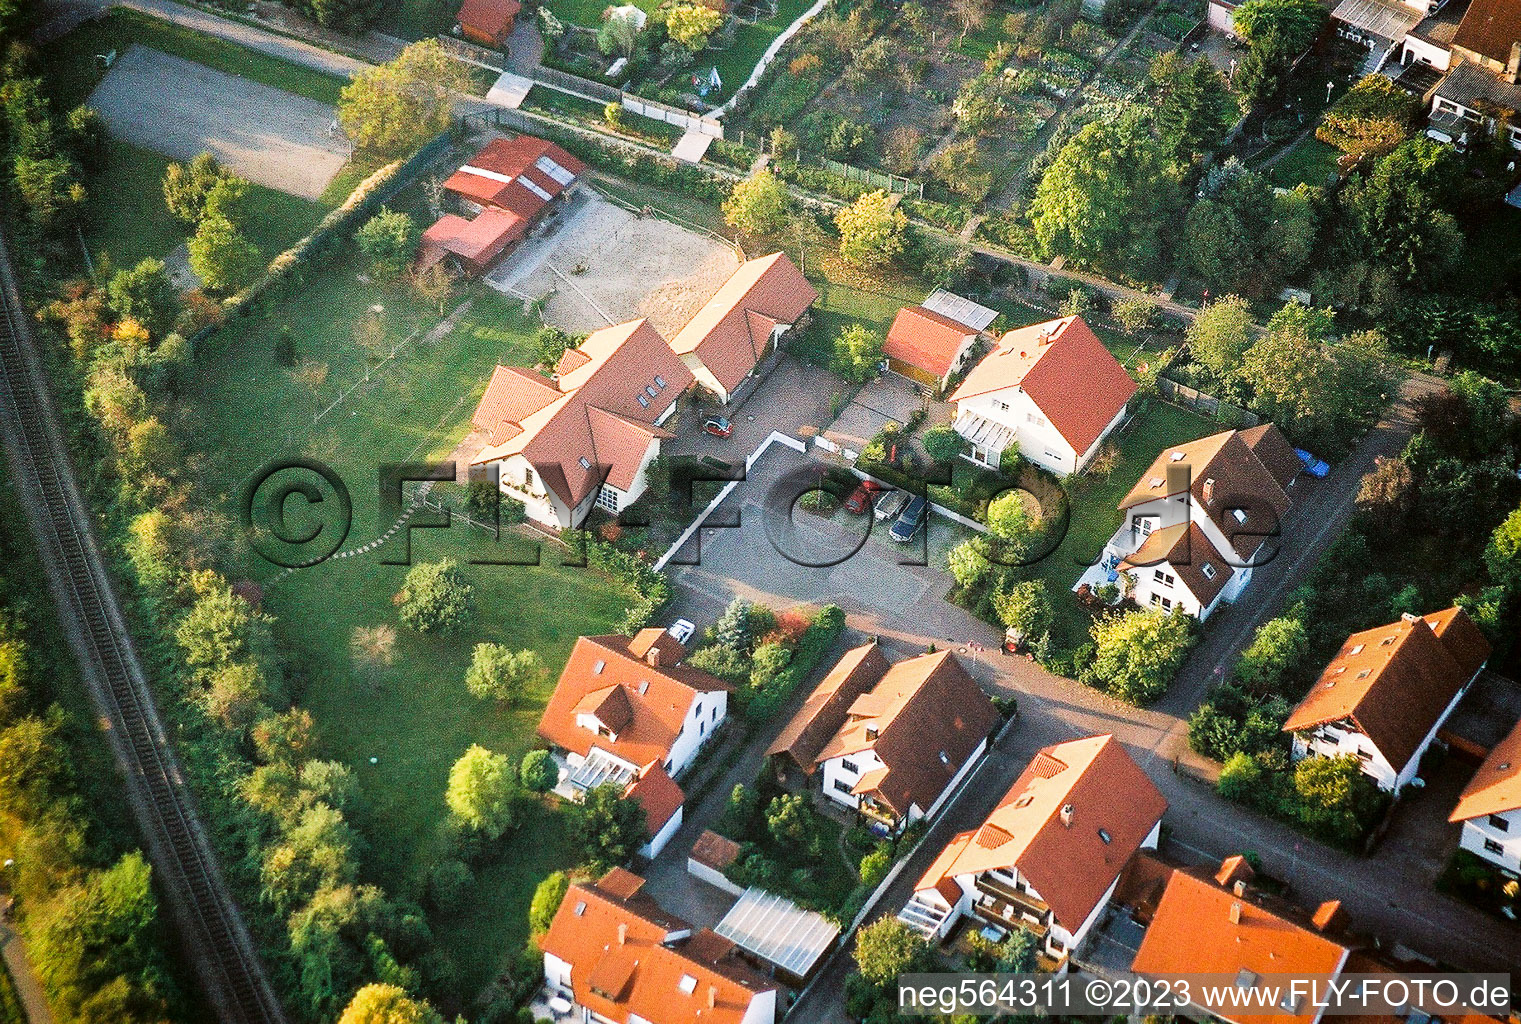 Aerial view of In the Mirabelle Garden in Kandel in the state Rhineland-Palatinate, Germany